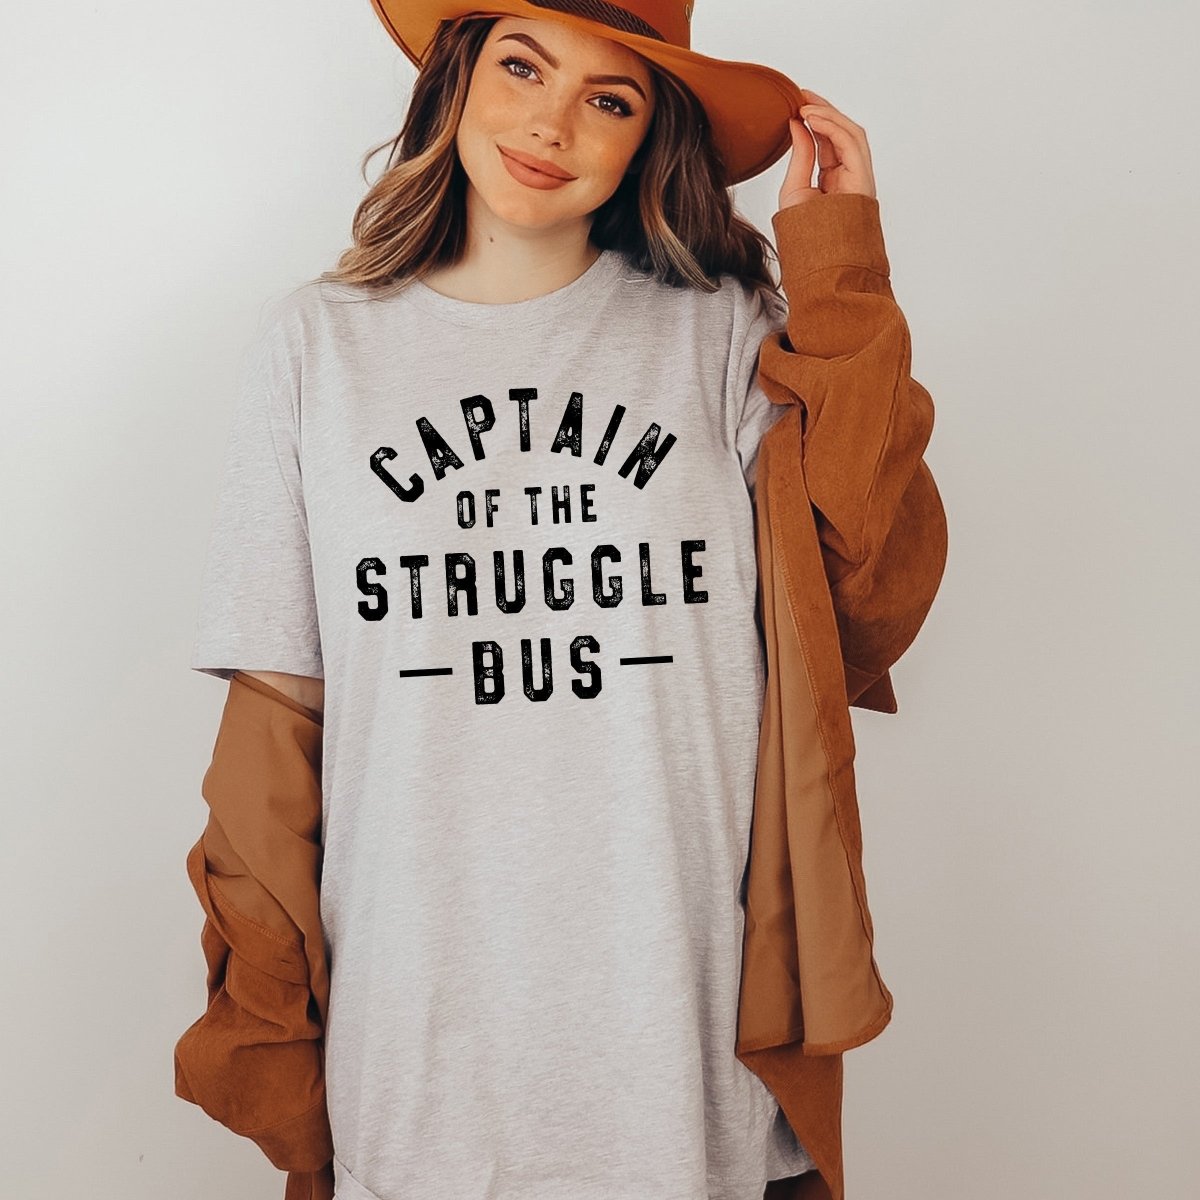 Captain of the Struggle Bus Wholesale Tee - Limeberry Designs